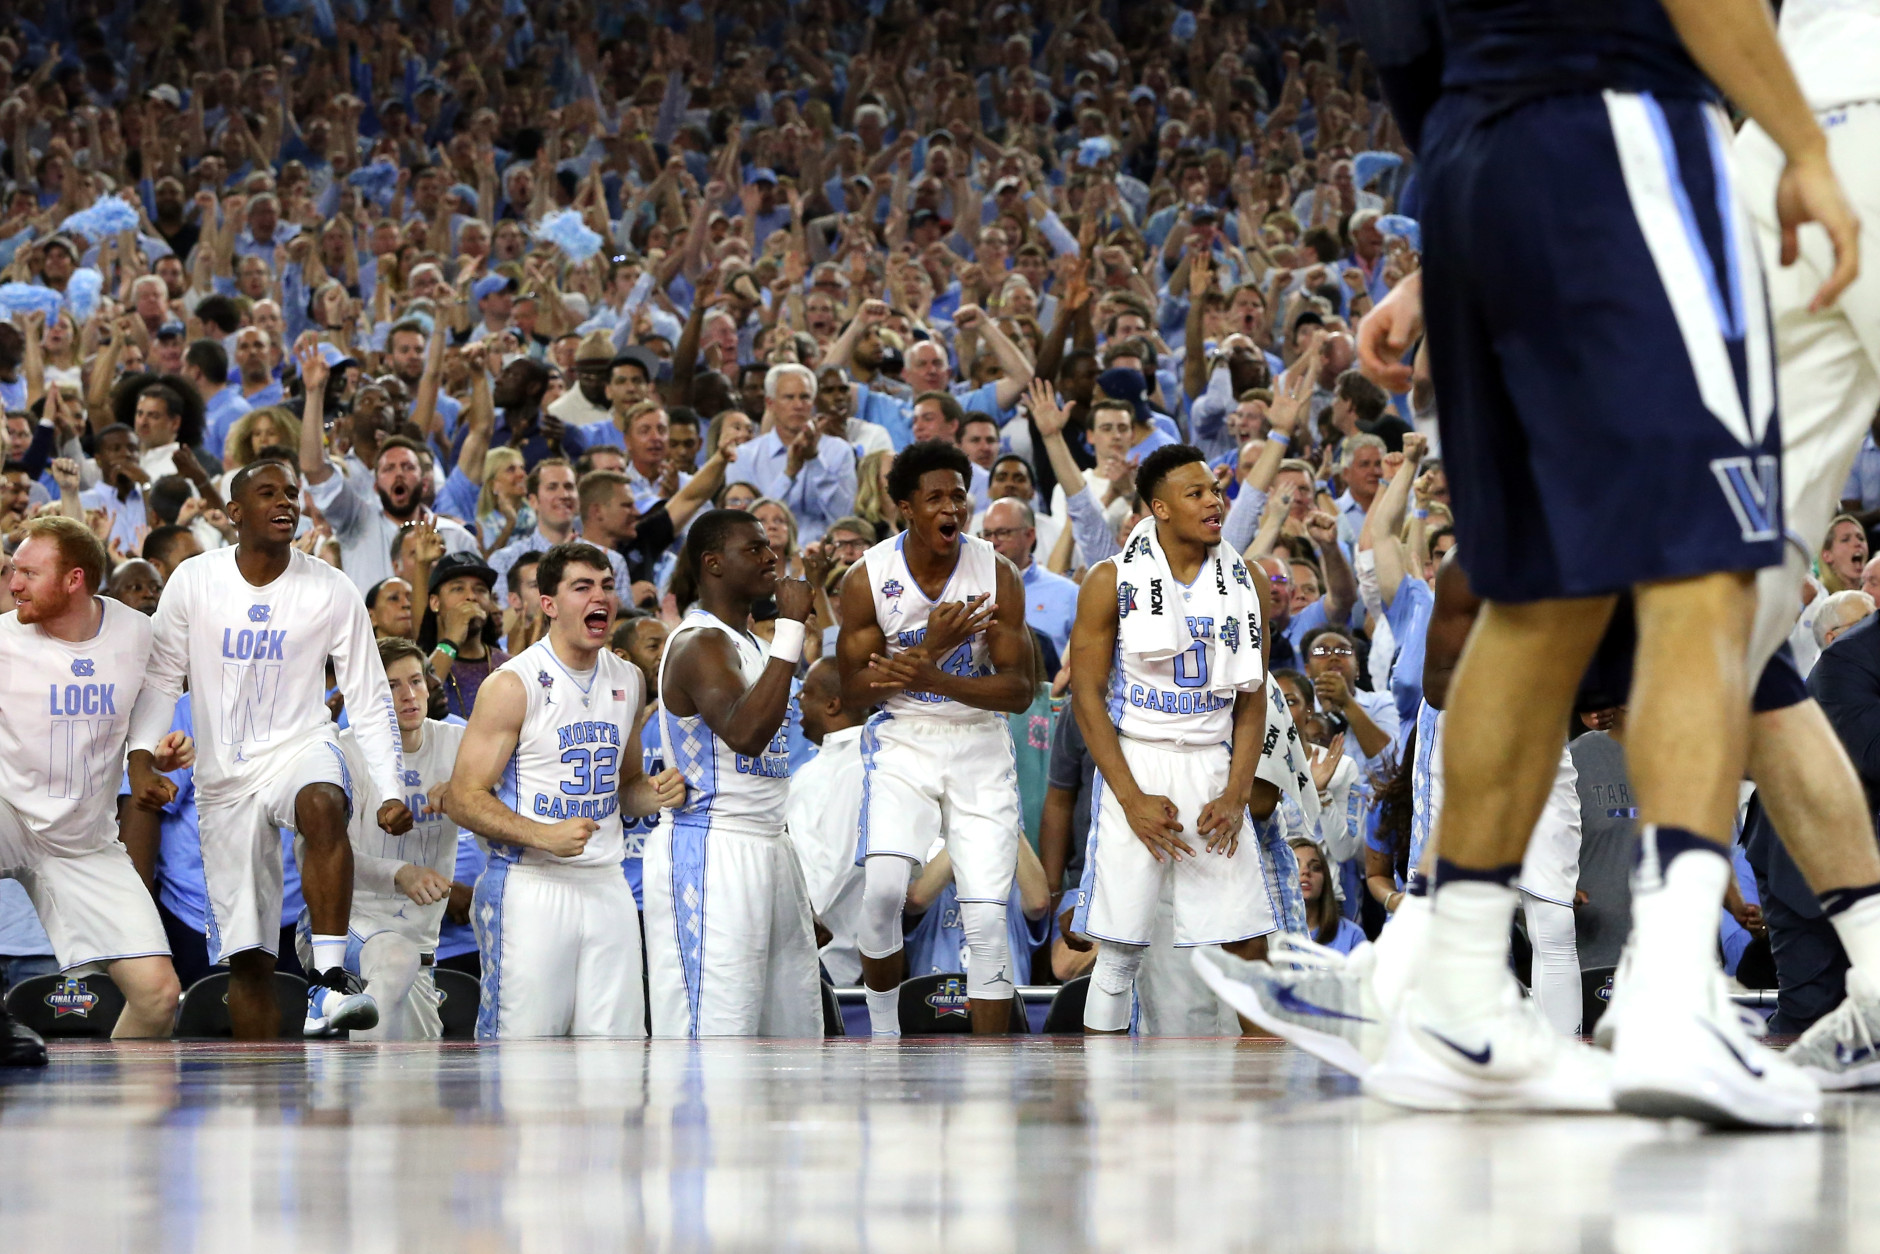 HOUSTON, TEXAS - APRIL 04:  The North Carolina Tar Heels bench reacts in the second half against the Villanova Wildcats during the 2016 NCAA Men's Final Four National Championship game at NRG Stadium on April 4, 2016 in Houston, Texas.  (Photo by Streeter Lecka/Getty Images)